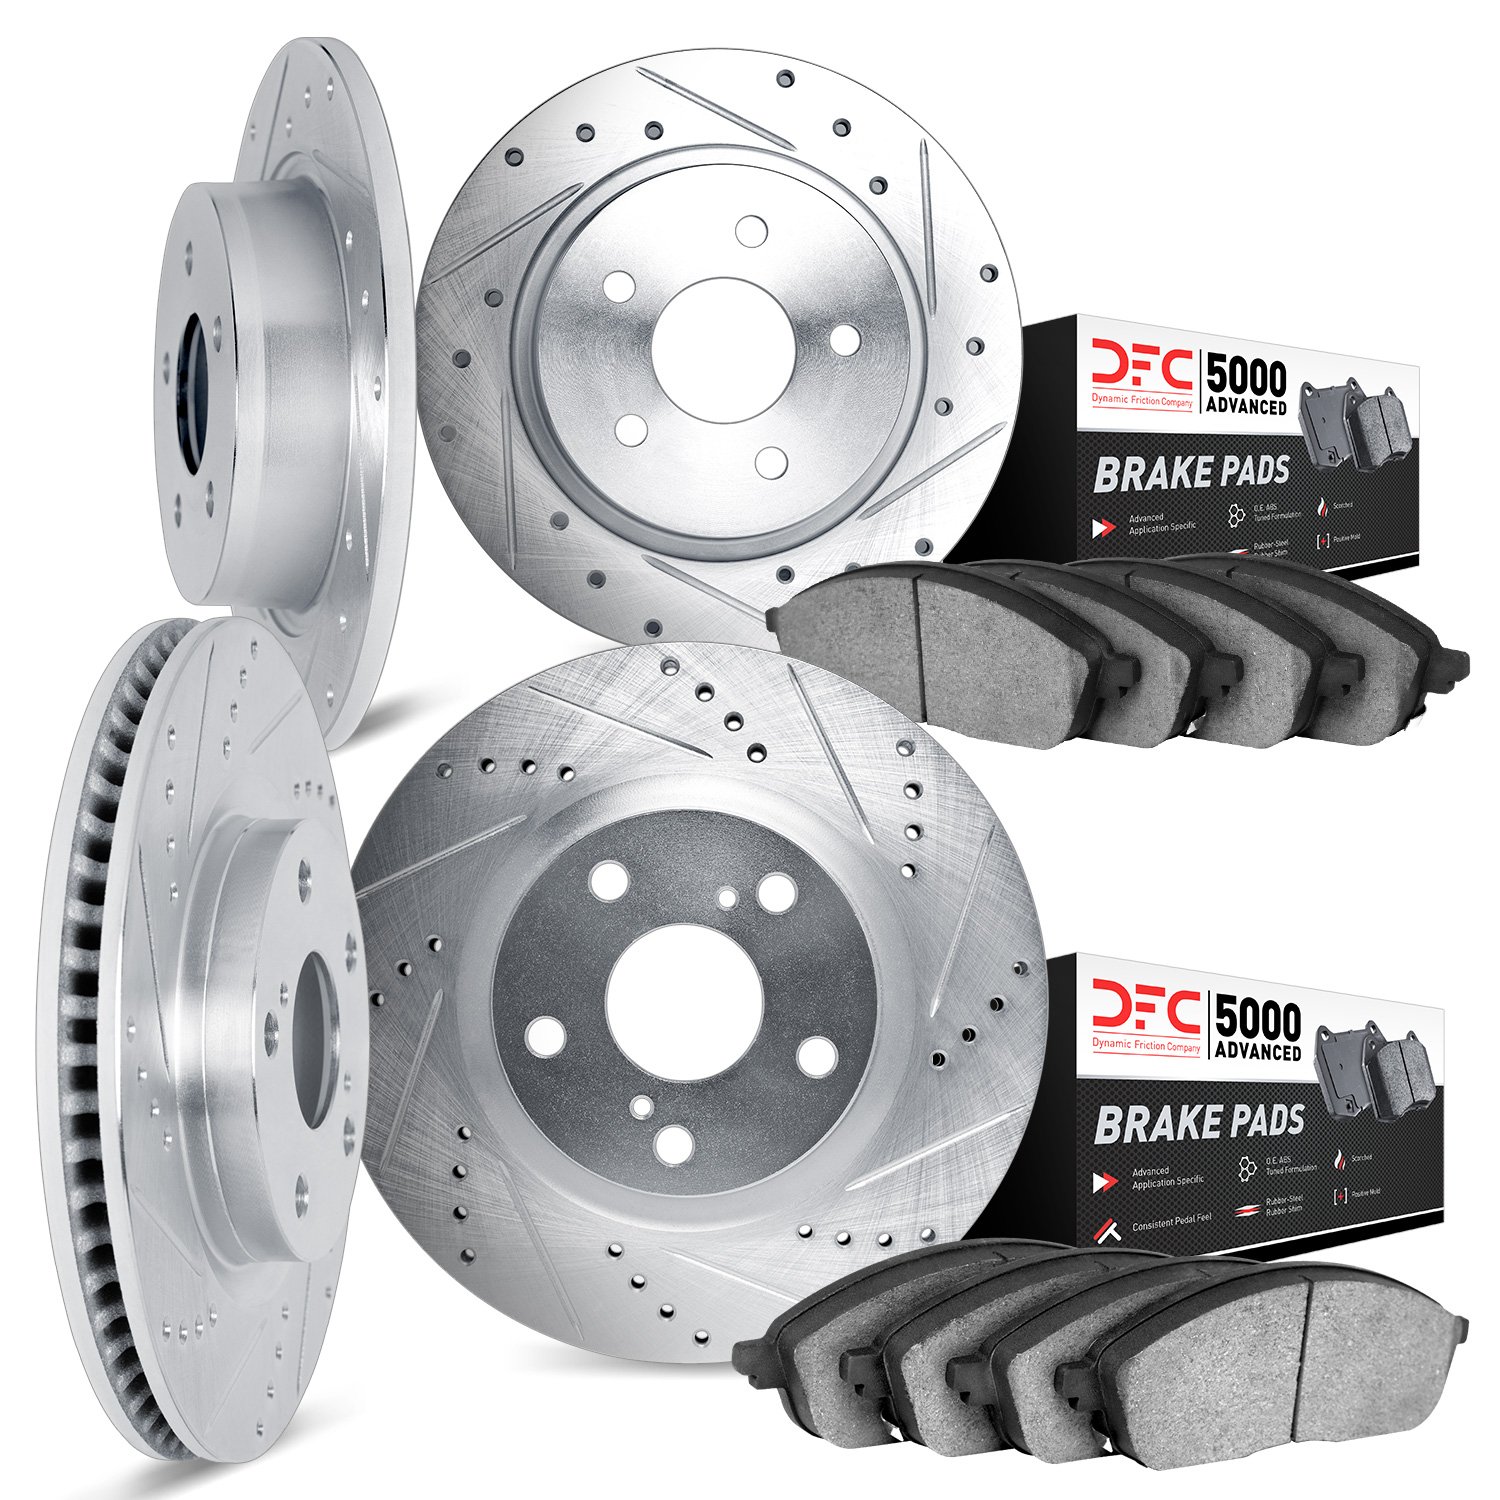 7504-76136 Drilled/Slotted Brake Rotors w/5000 Advanced Brake Pads Kit [Silver], 2002-2006 Lexus/Toyota/Scion, Position: Front a